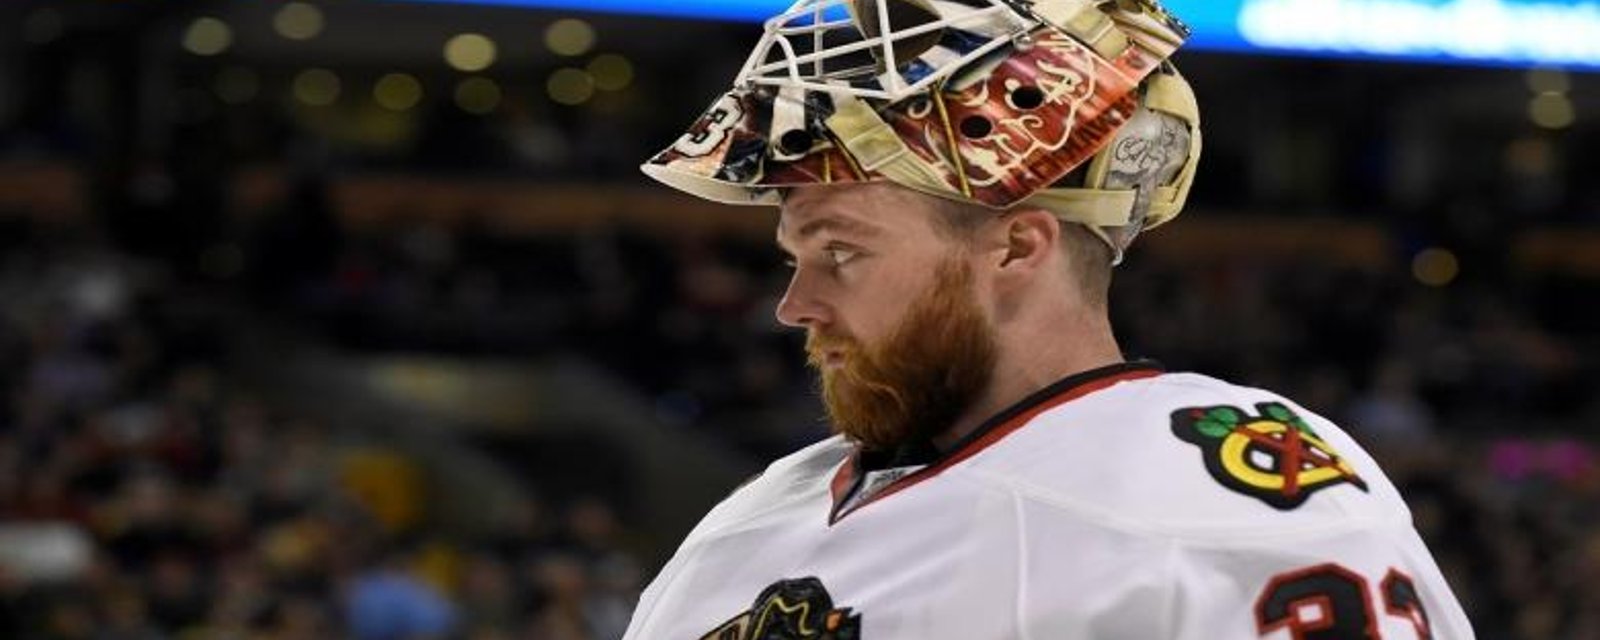 Scott Darling really likes playing on March 18th